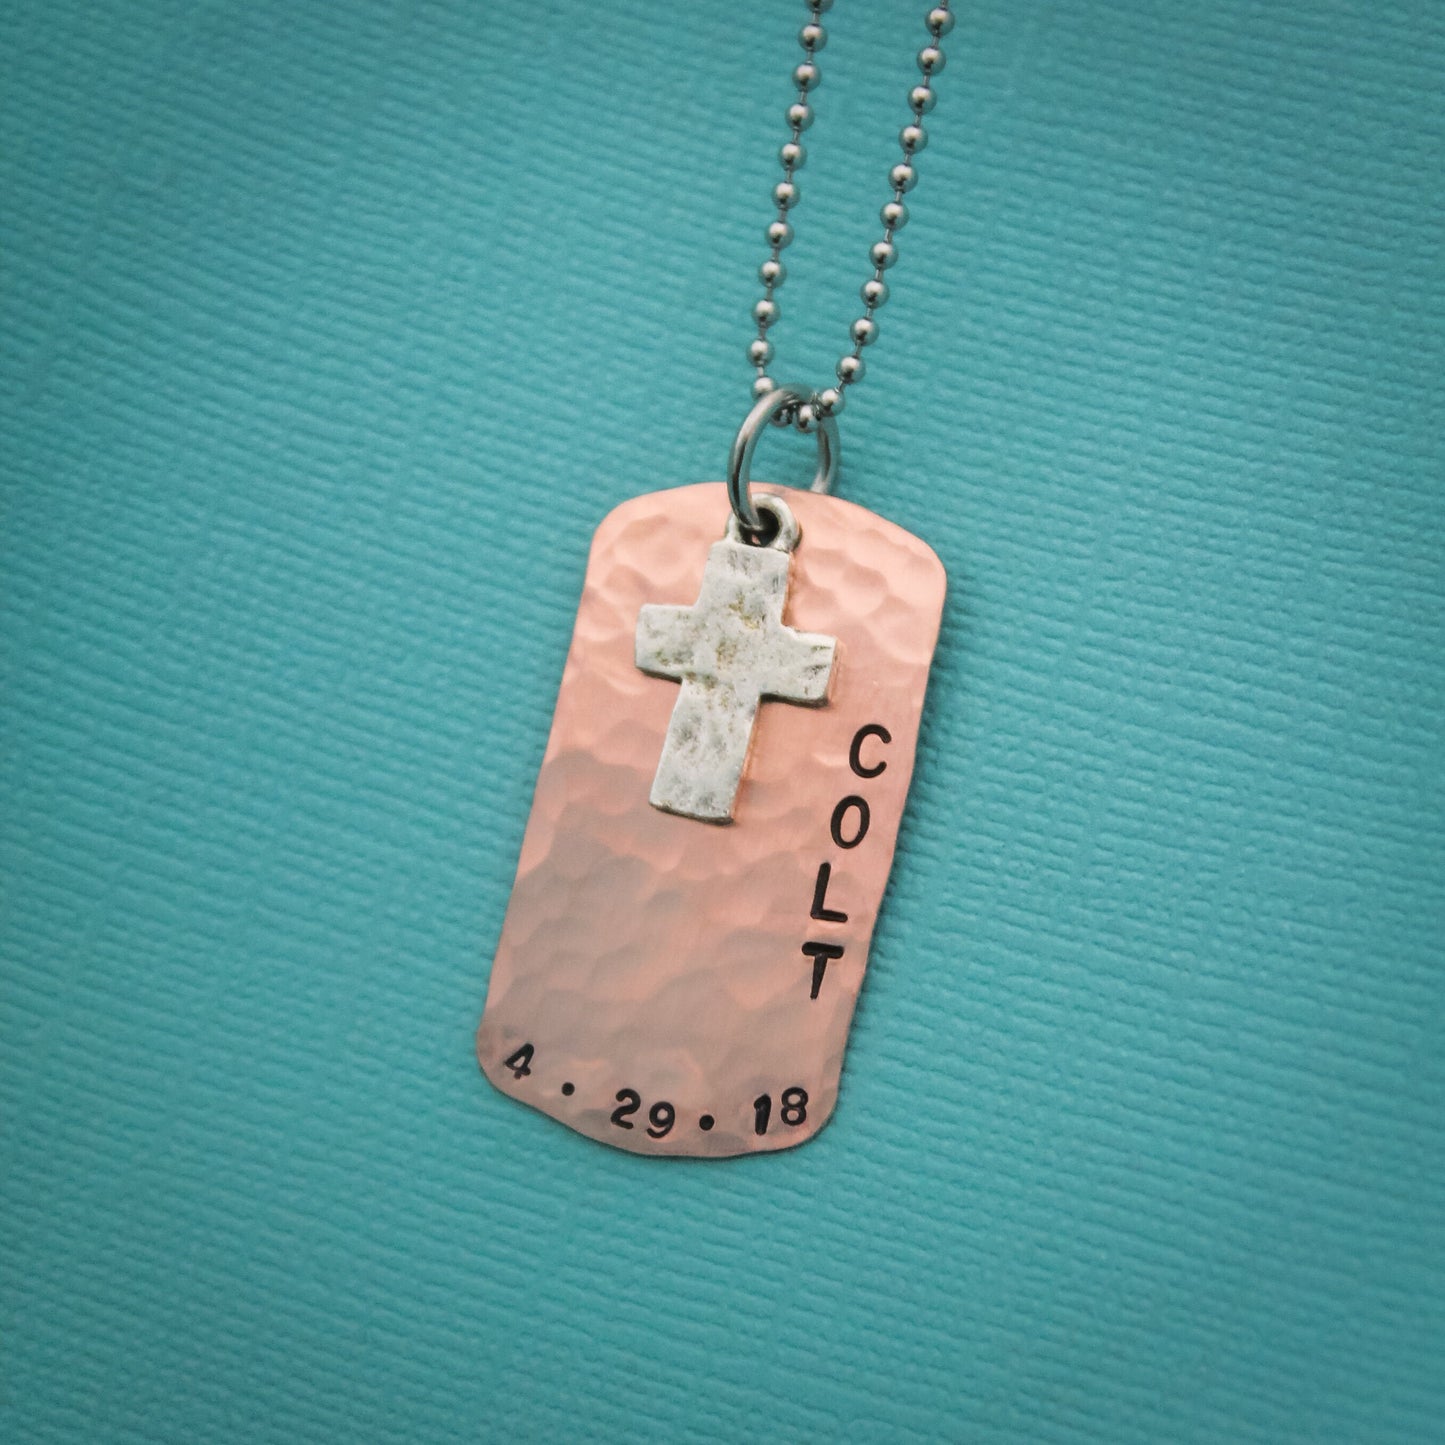 Boys Cross Necklace, Boys Confirmation or First Communion Gift, Copper Dog Tag Cross Necklace for Boys,  Hand Stamped and Personalized